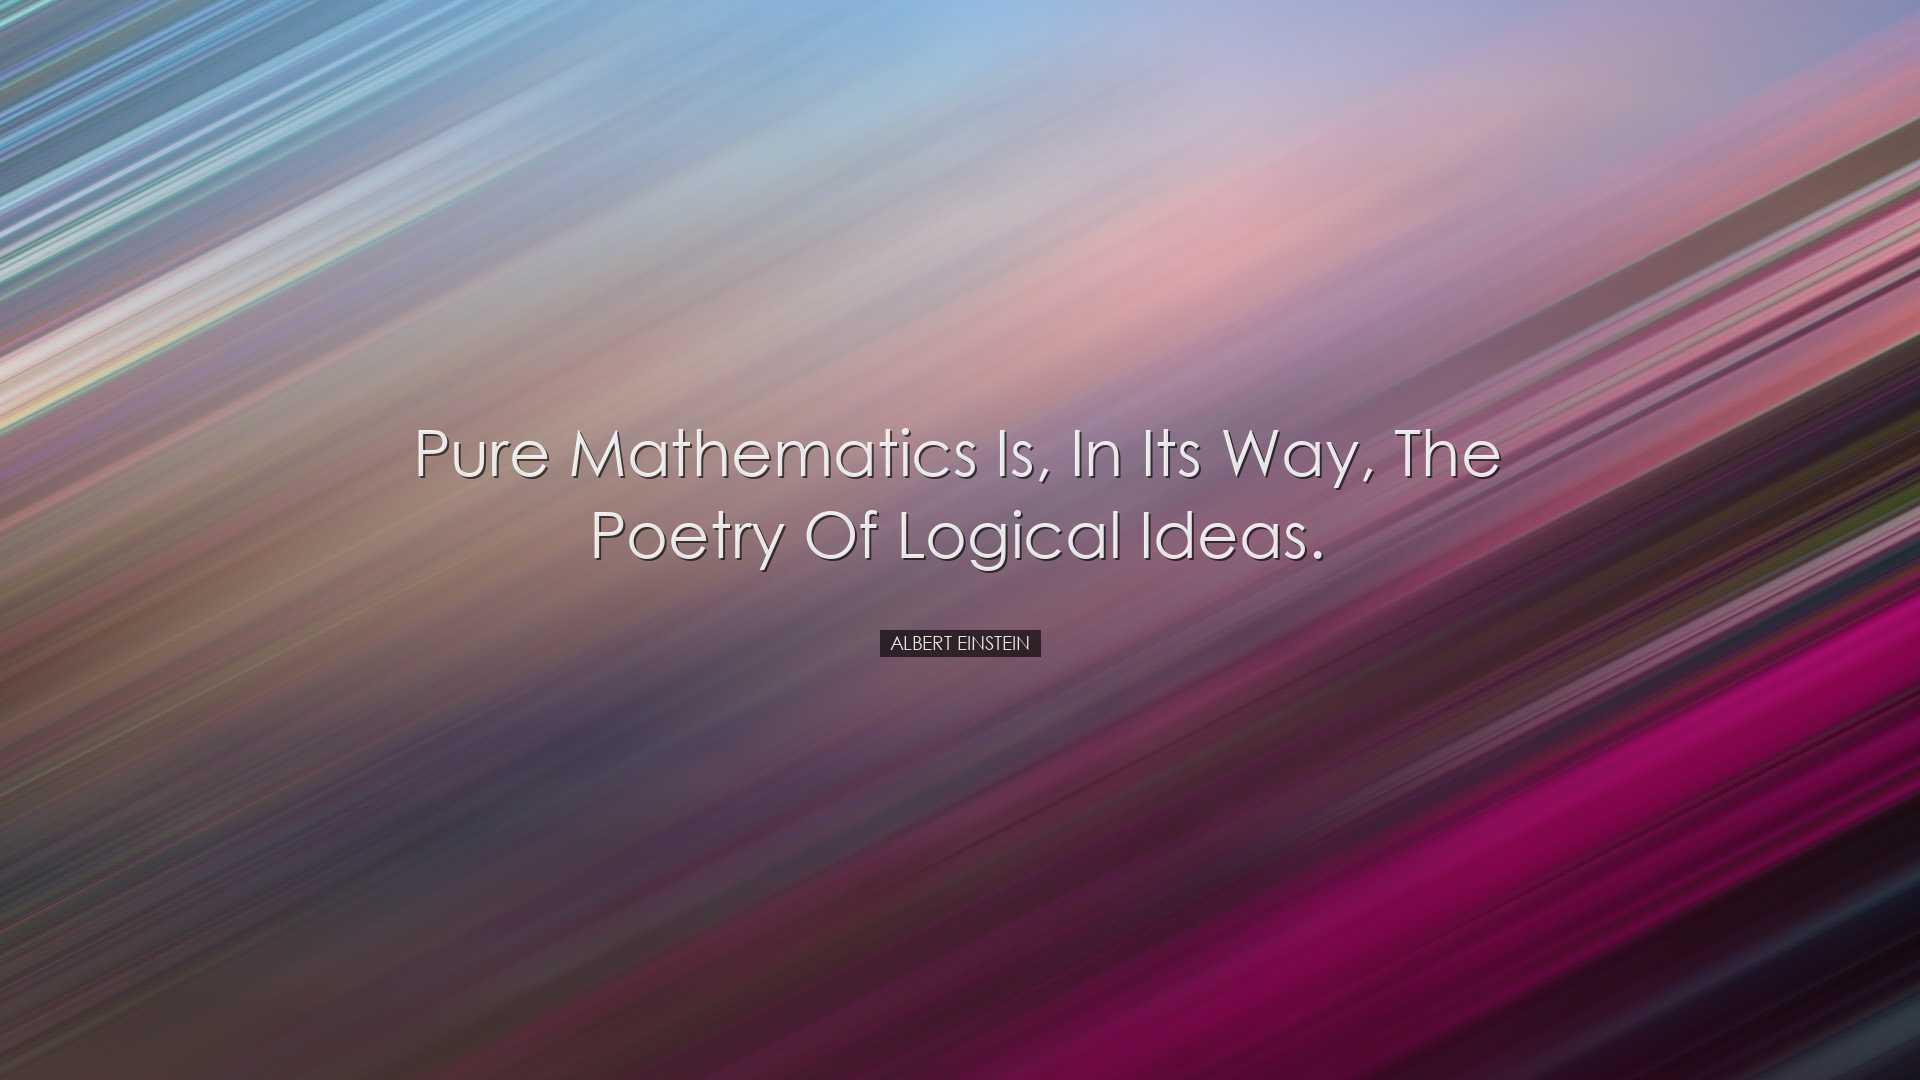 Pure mathematics is, in its way, the poetry of logical ideas. - Al